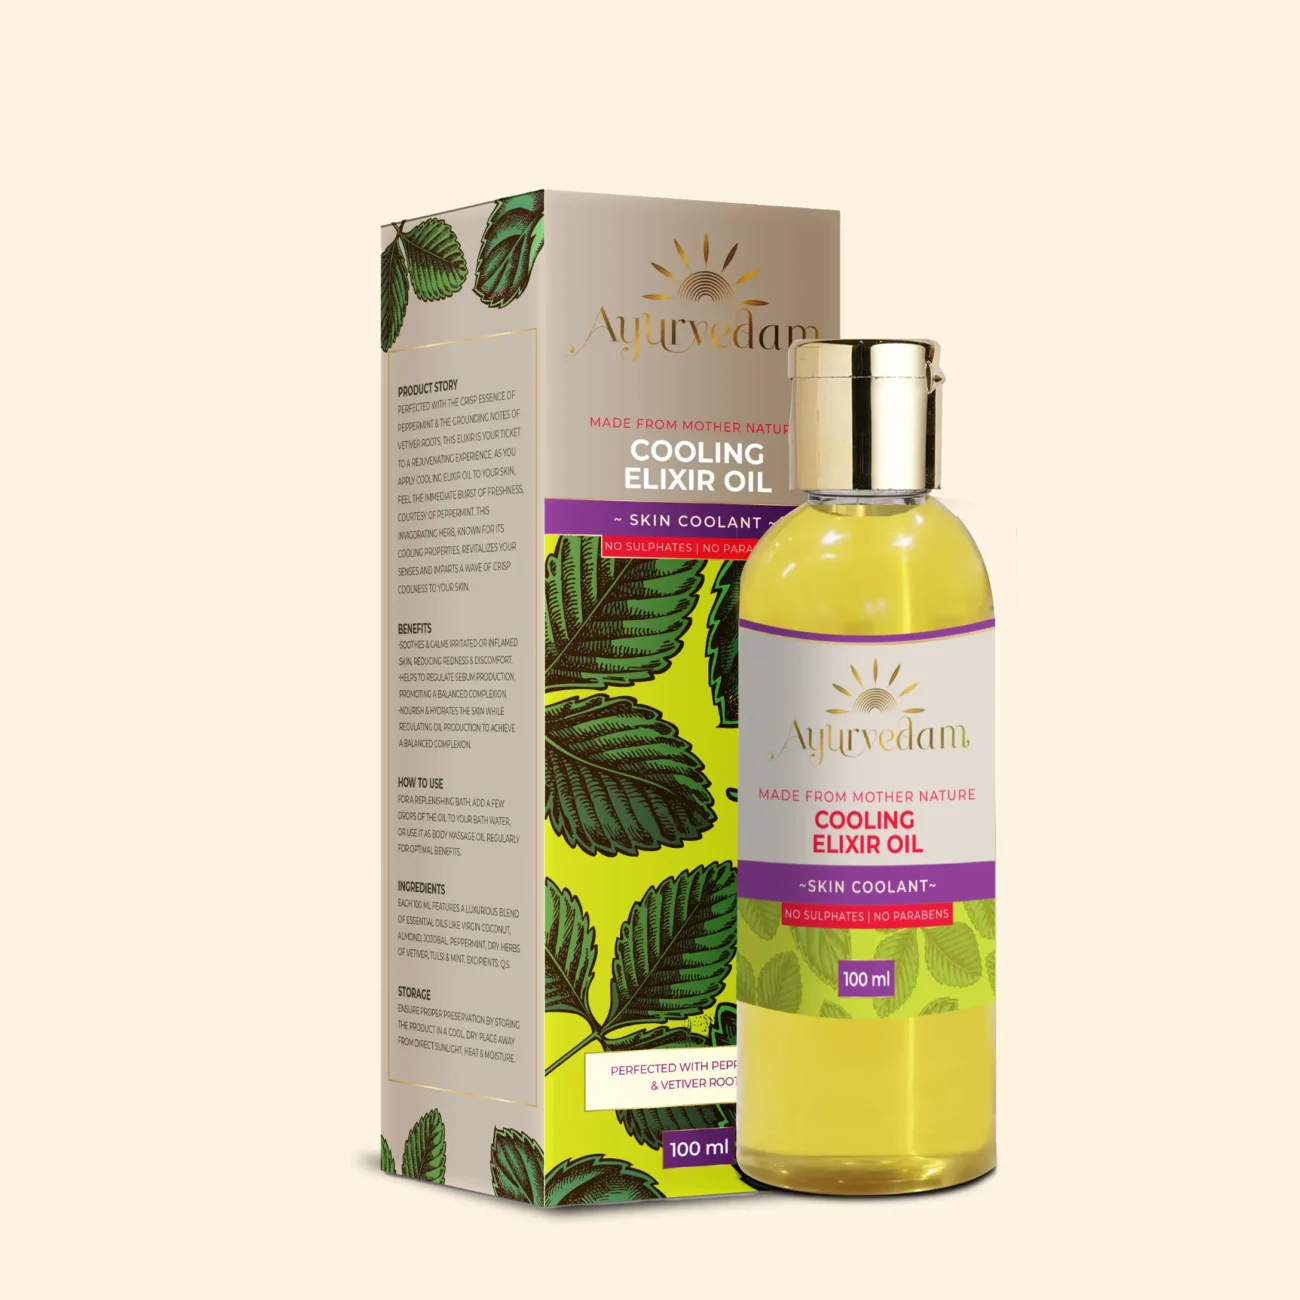 Cooling Elixir Oil, an ayurvedic body massage oil along with its package by Ayurvedam